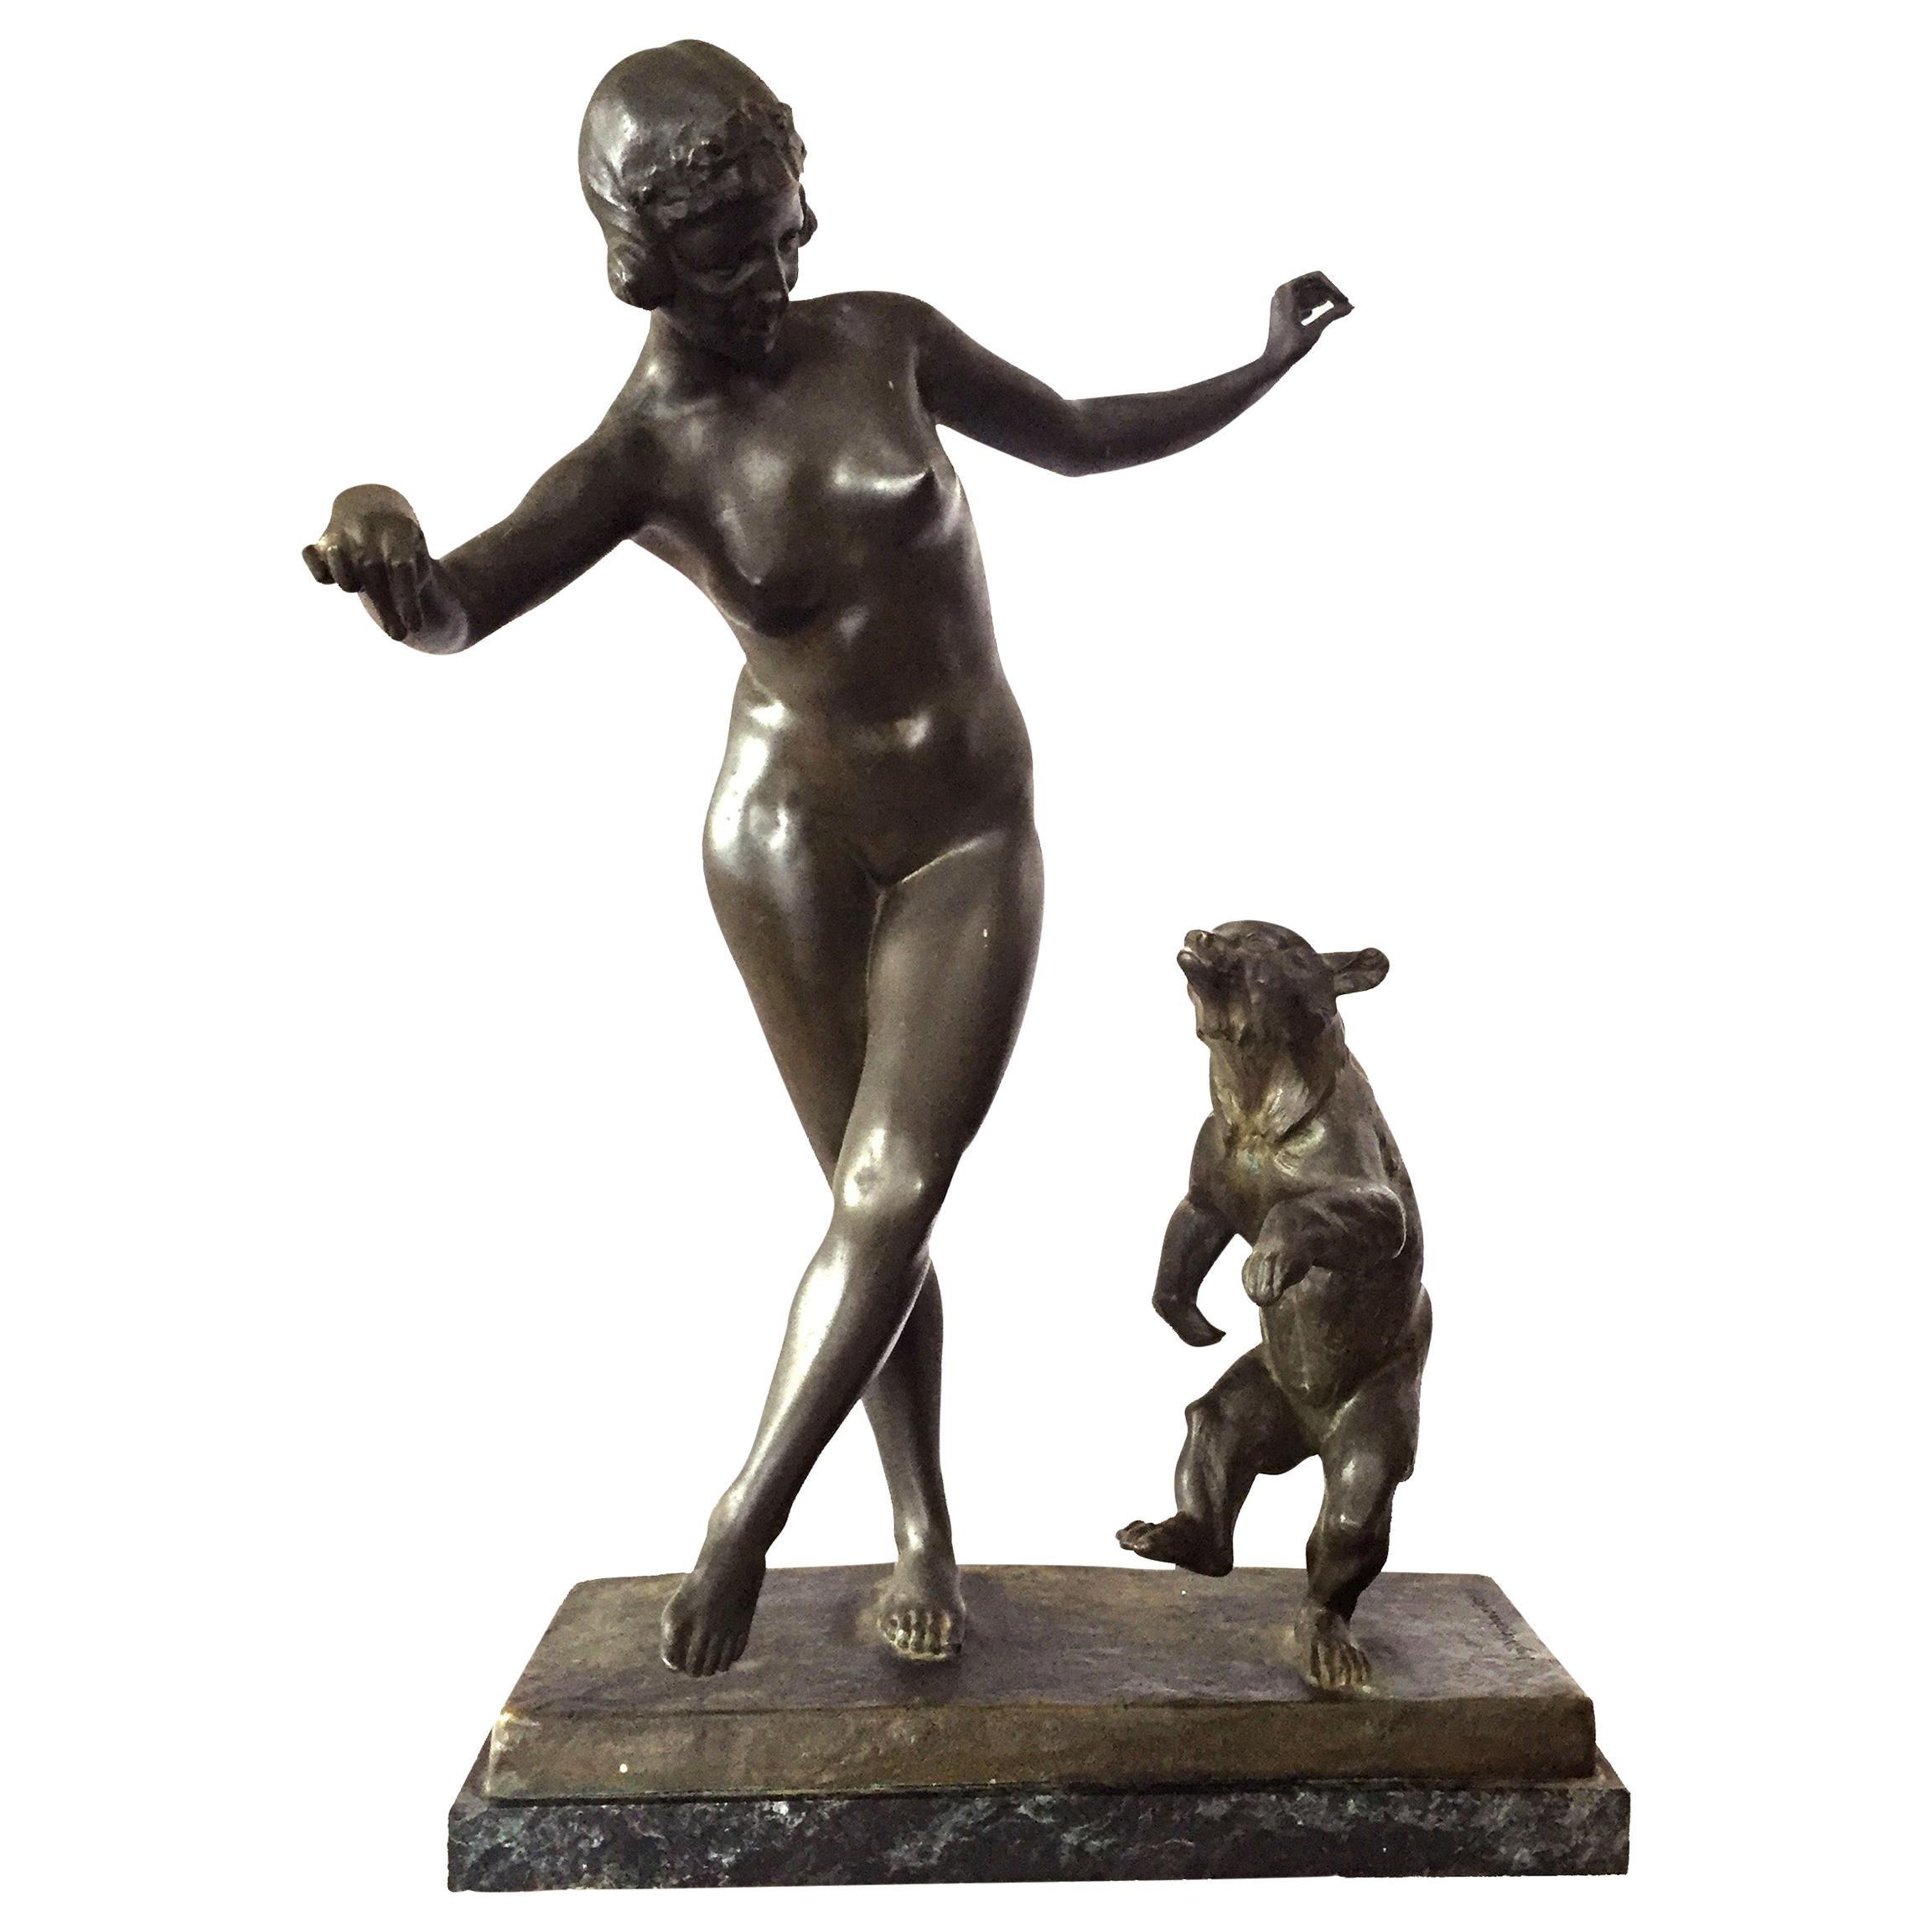 Jean VERSCHNEIDER (1872-1943)

Danseuse à l'ourson (Dancer with Bear Cub)

Large bronze proof with brown patina
Antique edition cast, no mark or foundry seal.
Signed

Weight: Approx 40 LBs

Height: 54,5 cm (21-1/2 in.) - Base: 13,5 x 35,5 cm (5-1/4